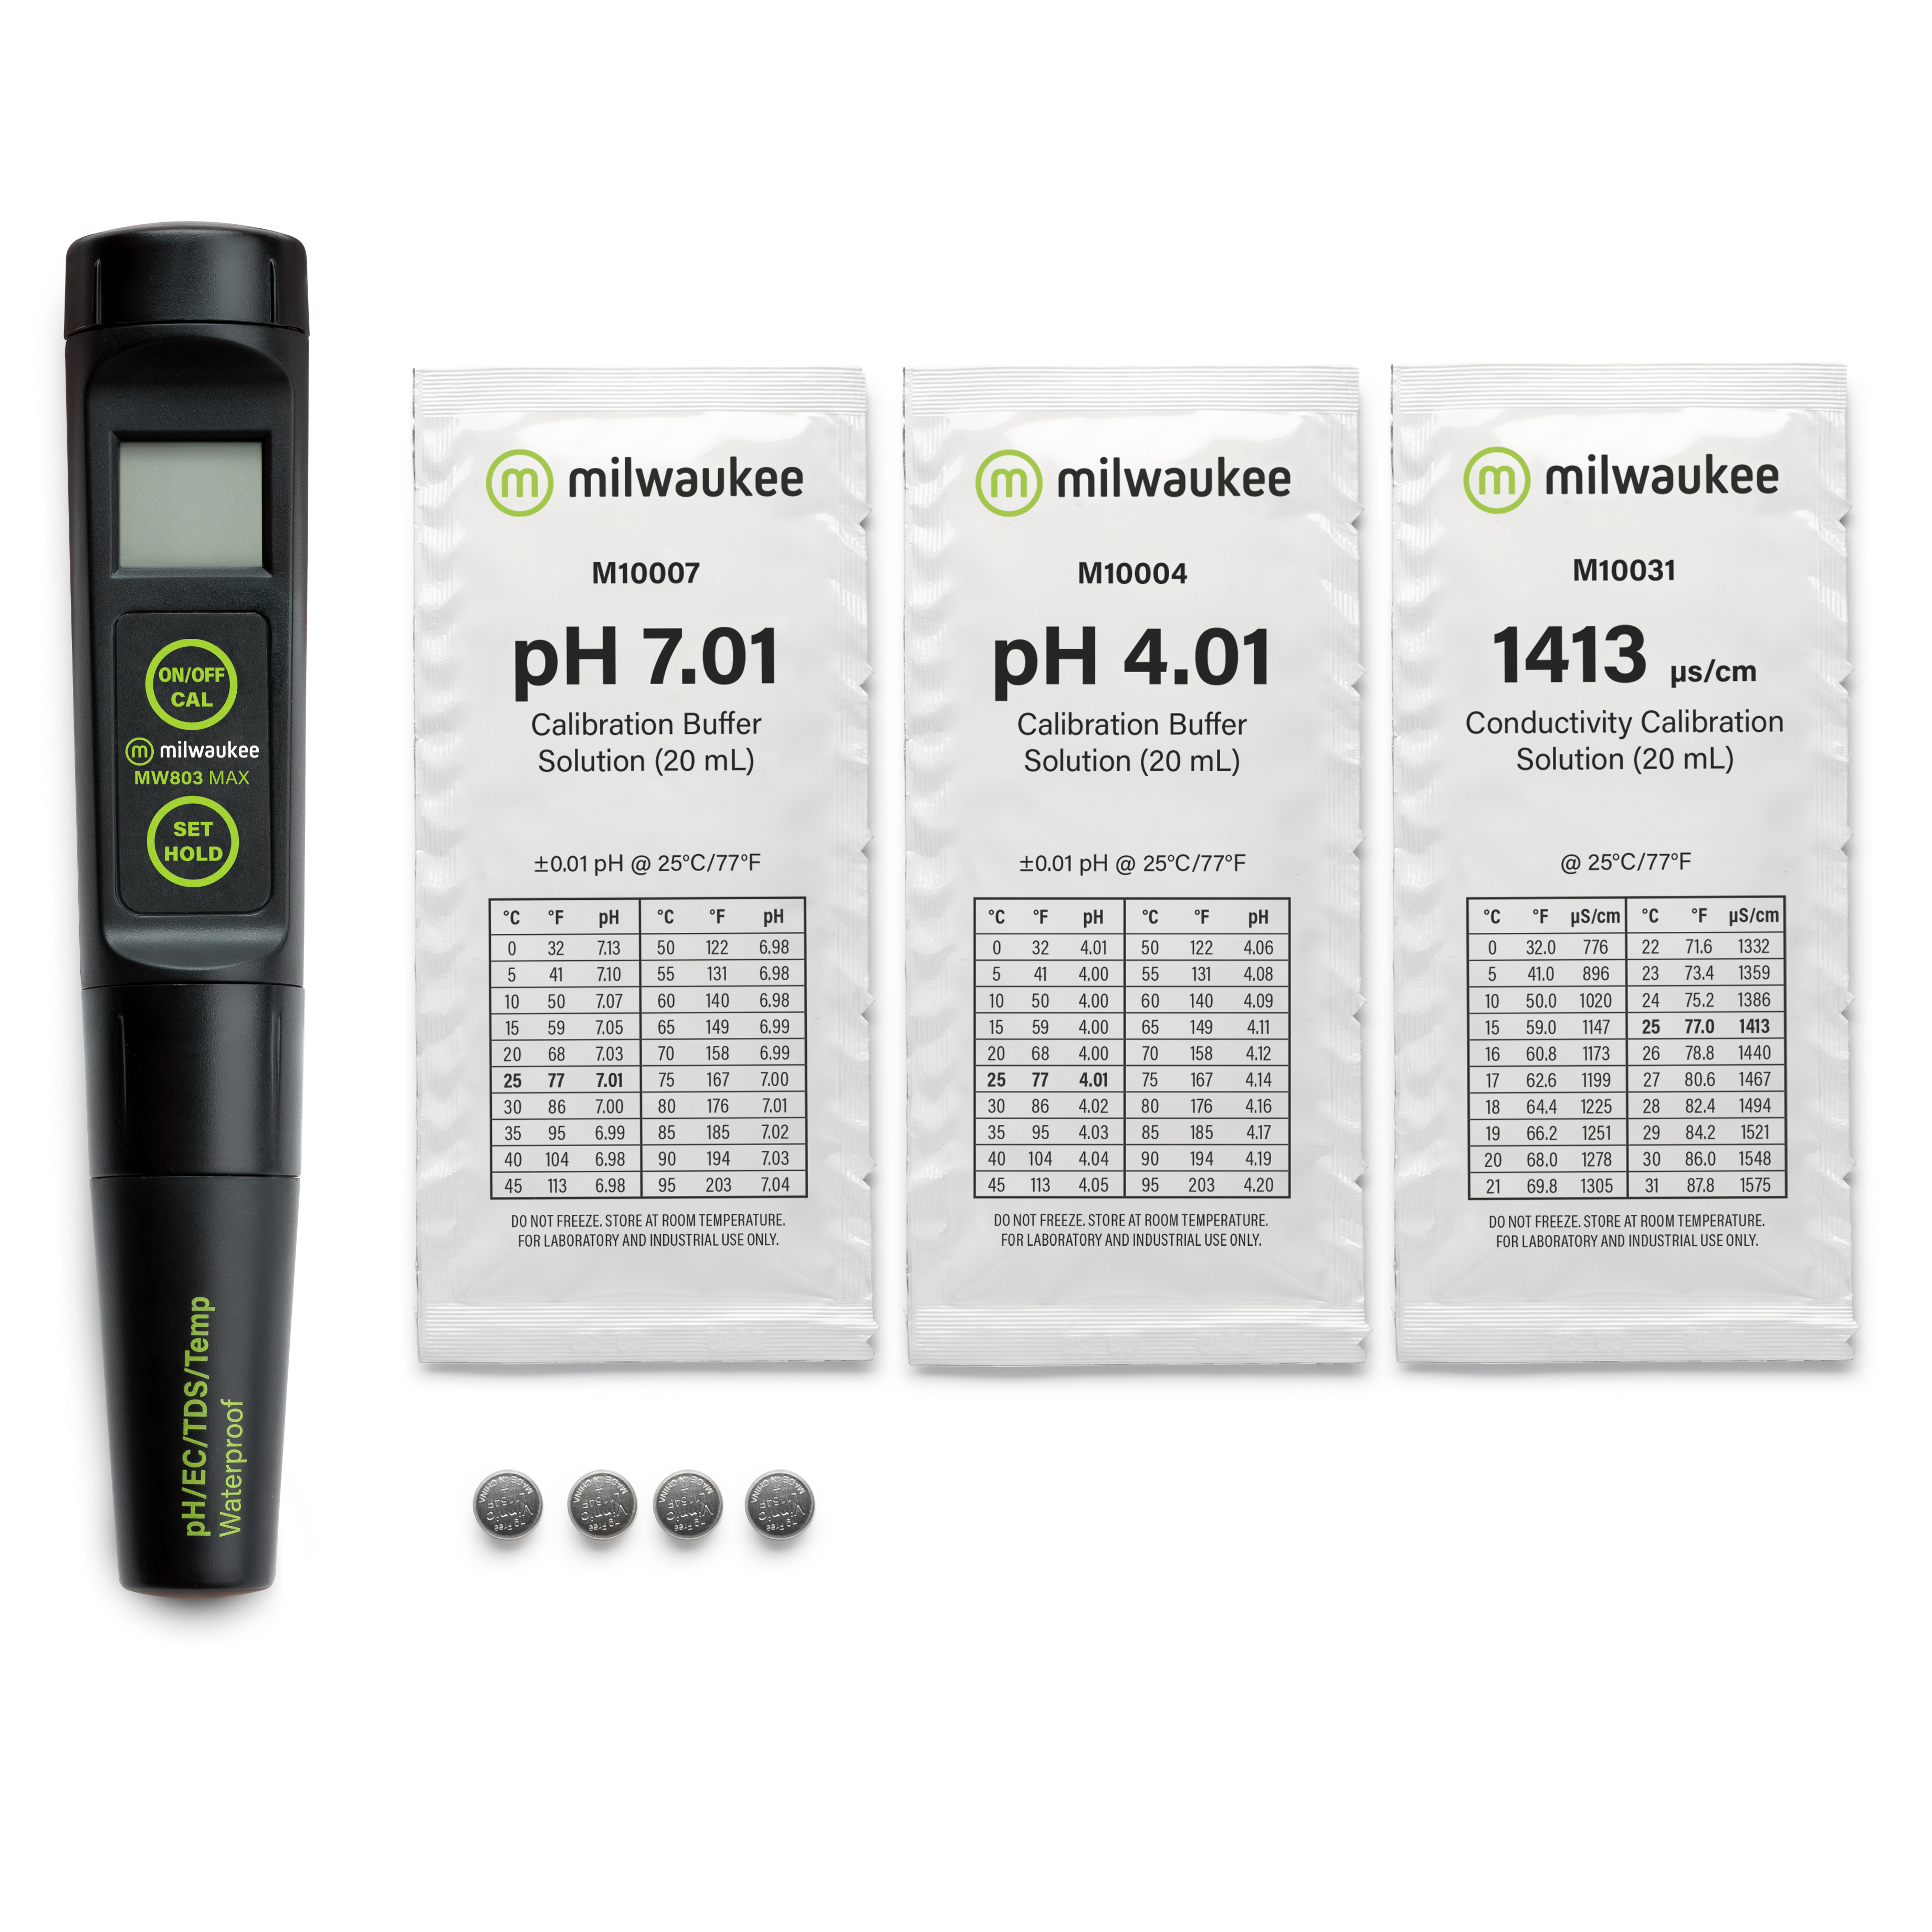 Milwaukee MW803 waterproof low range pH / EC / TDS /Temperature Tester with replaceable probe